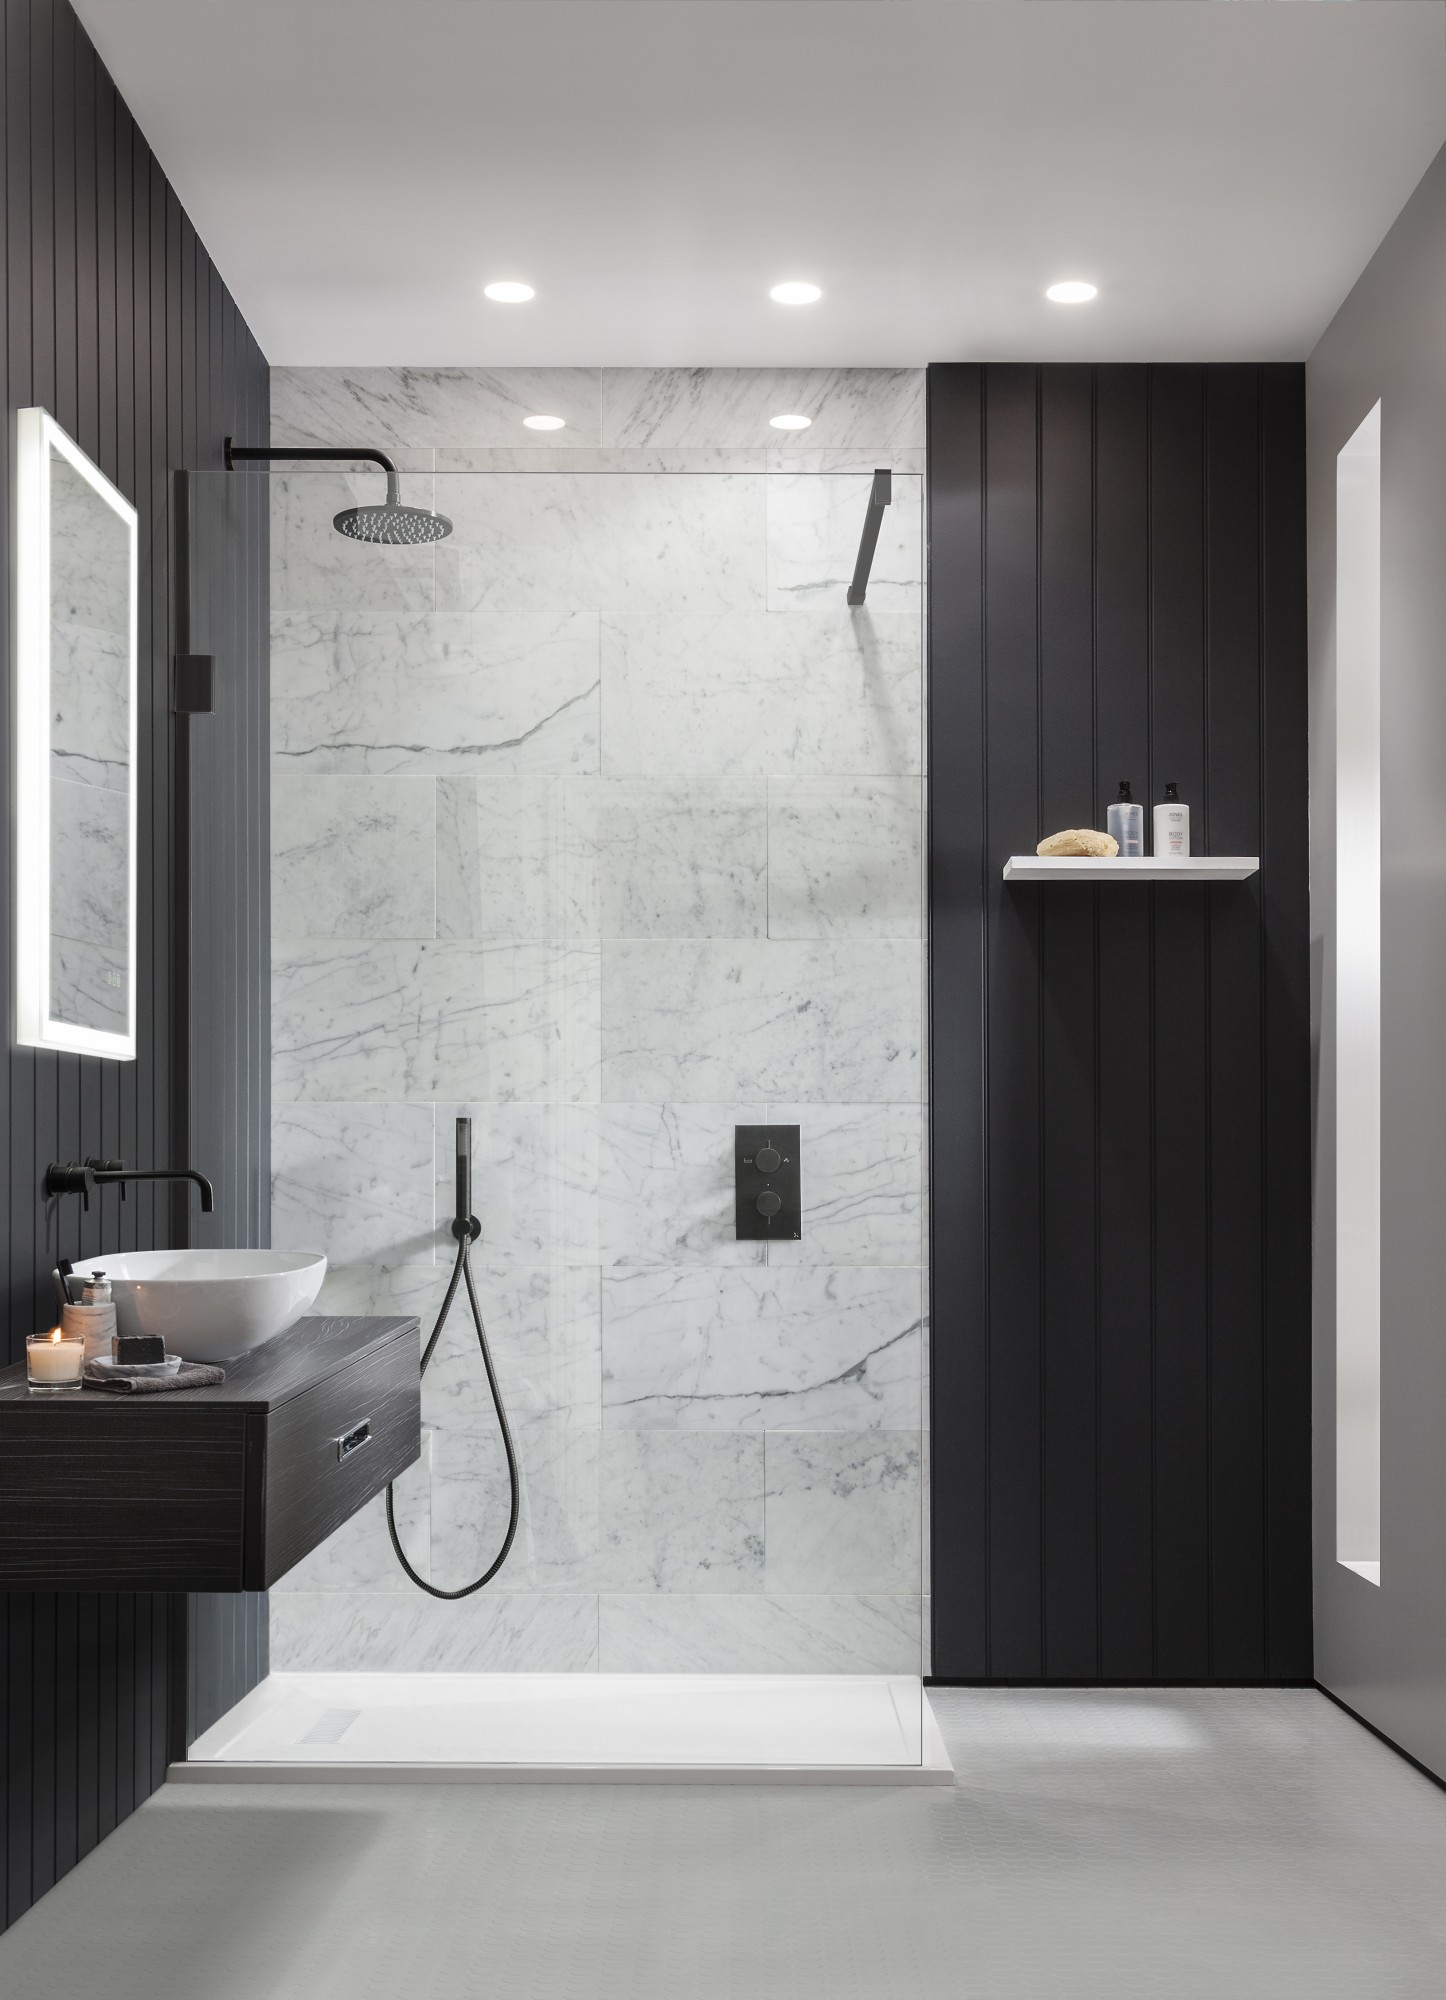 Take a look at these black bathroom interiors